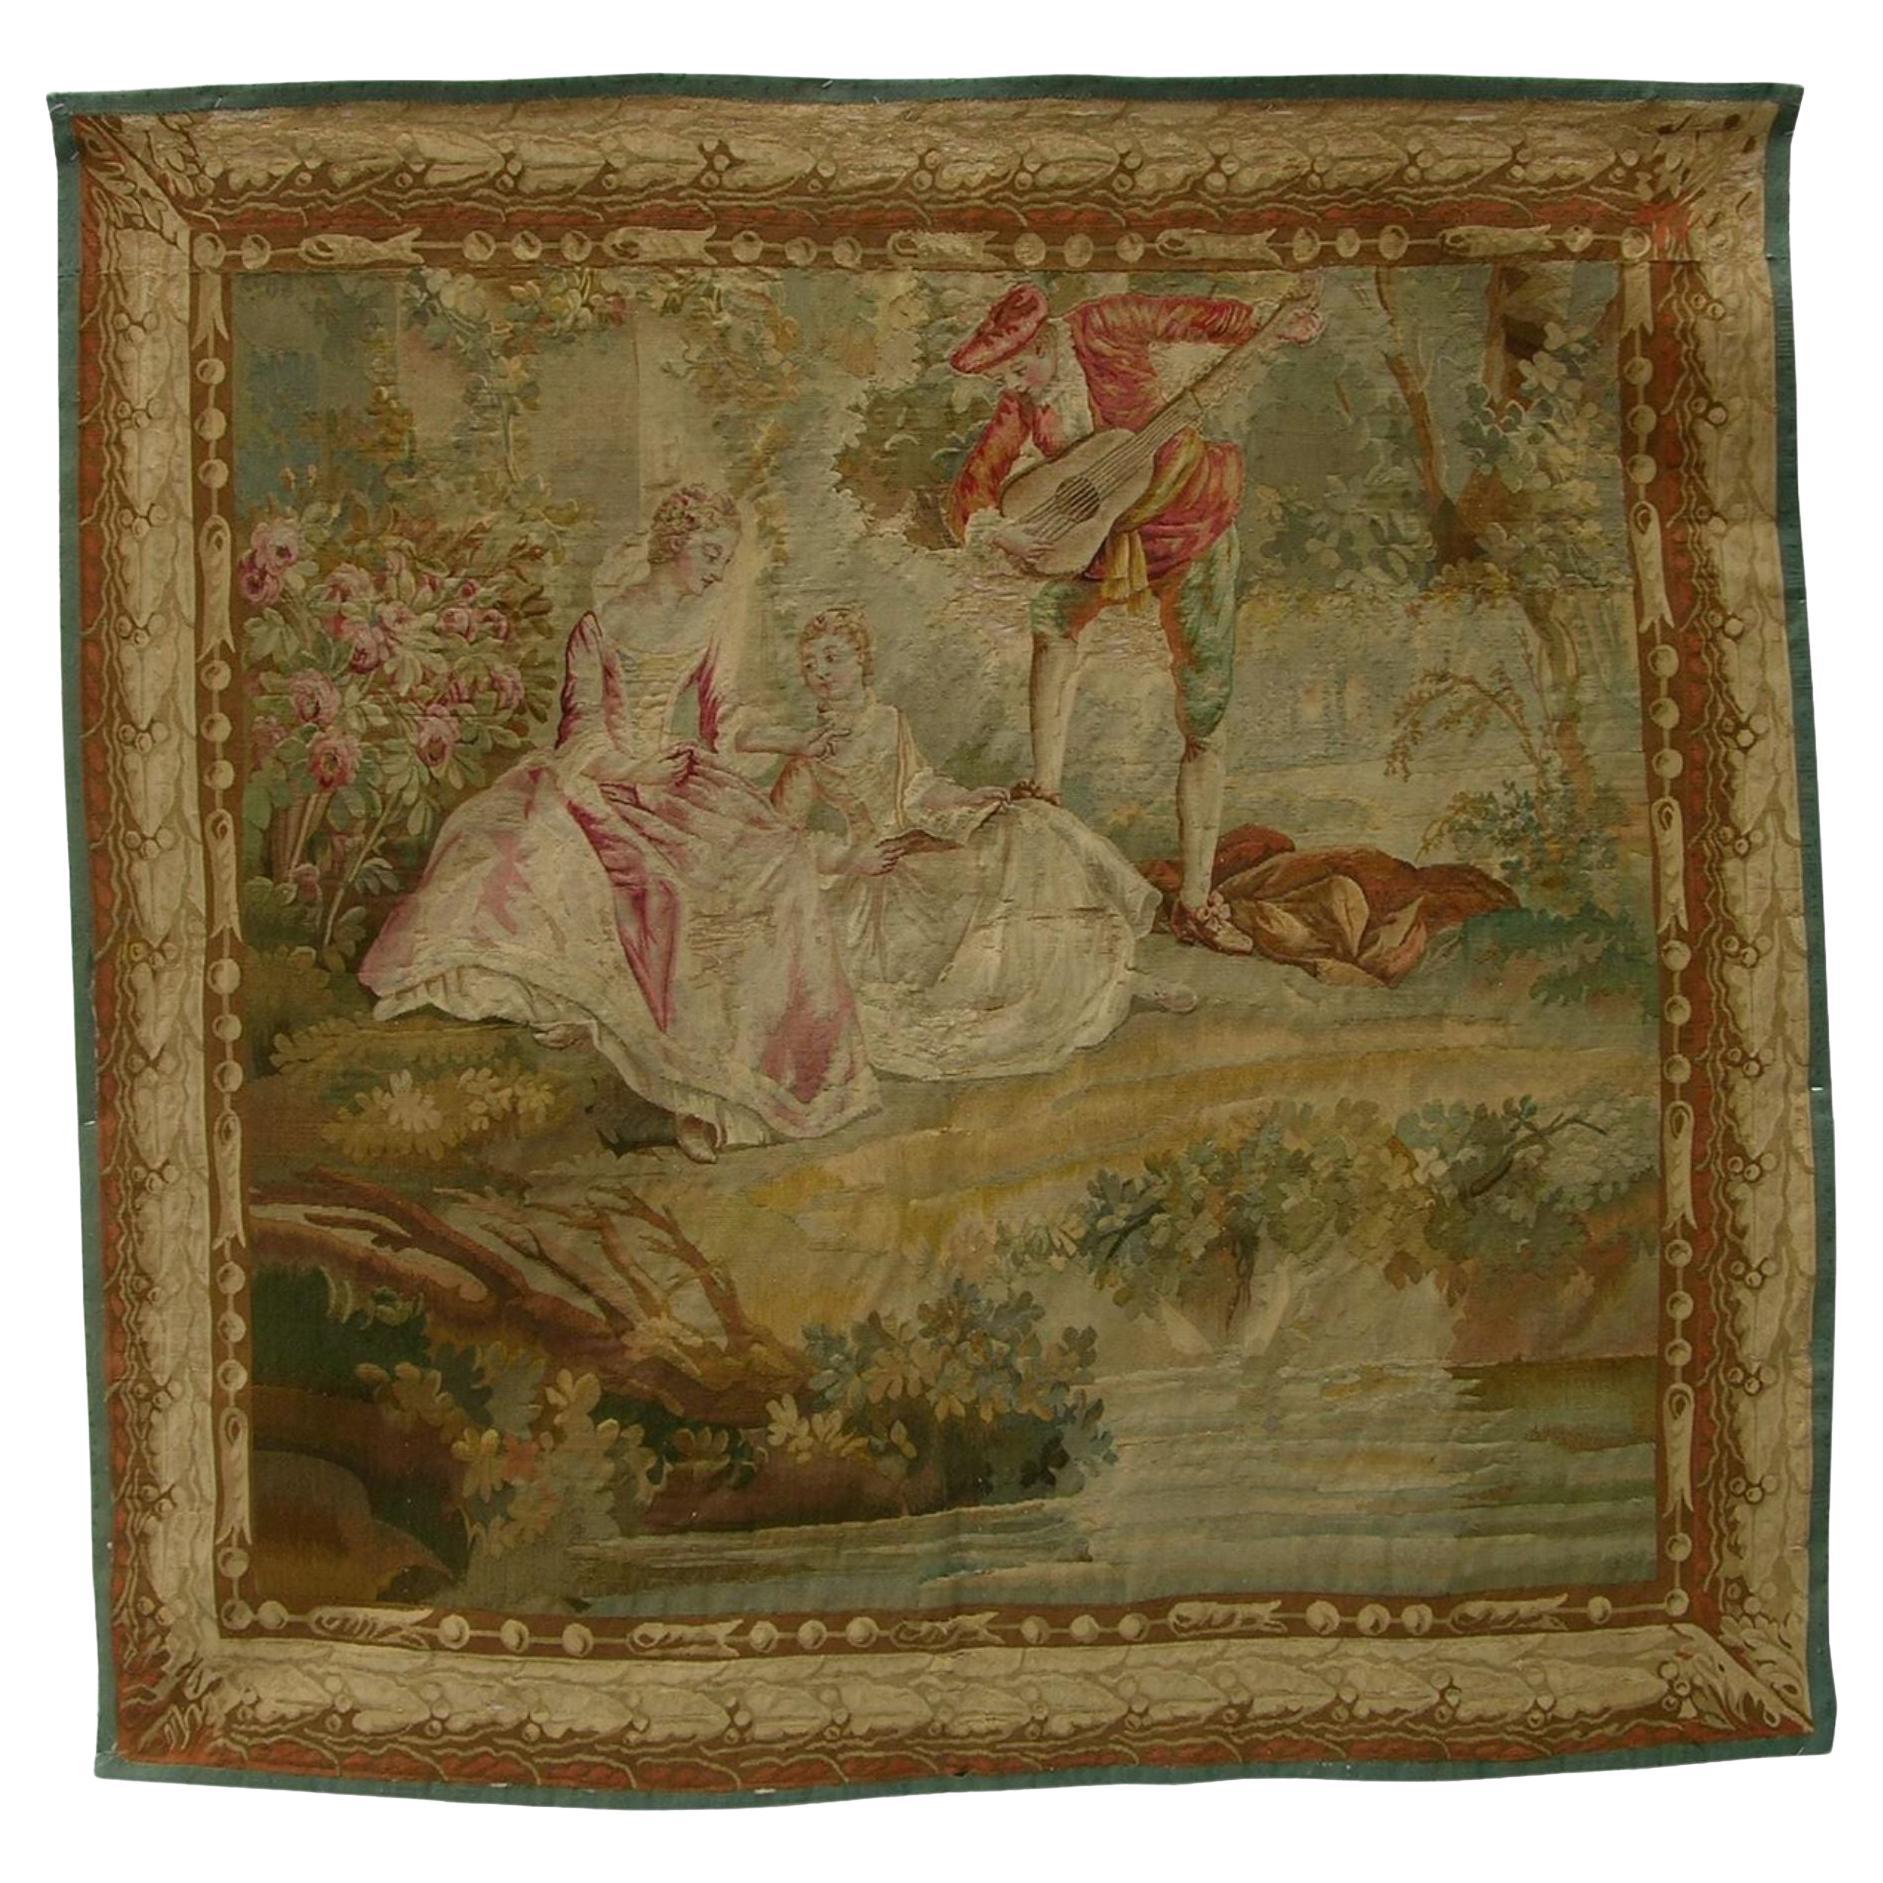 1900 Antique French Tapestry 5'4" X 5'2"